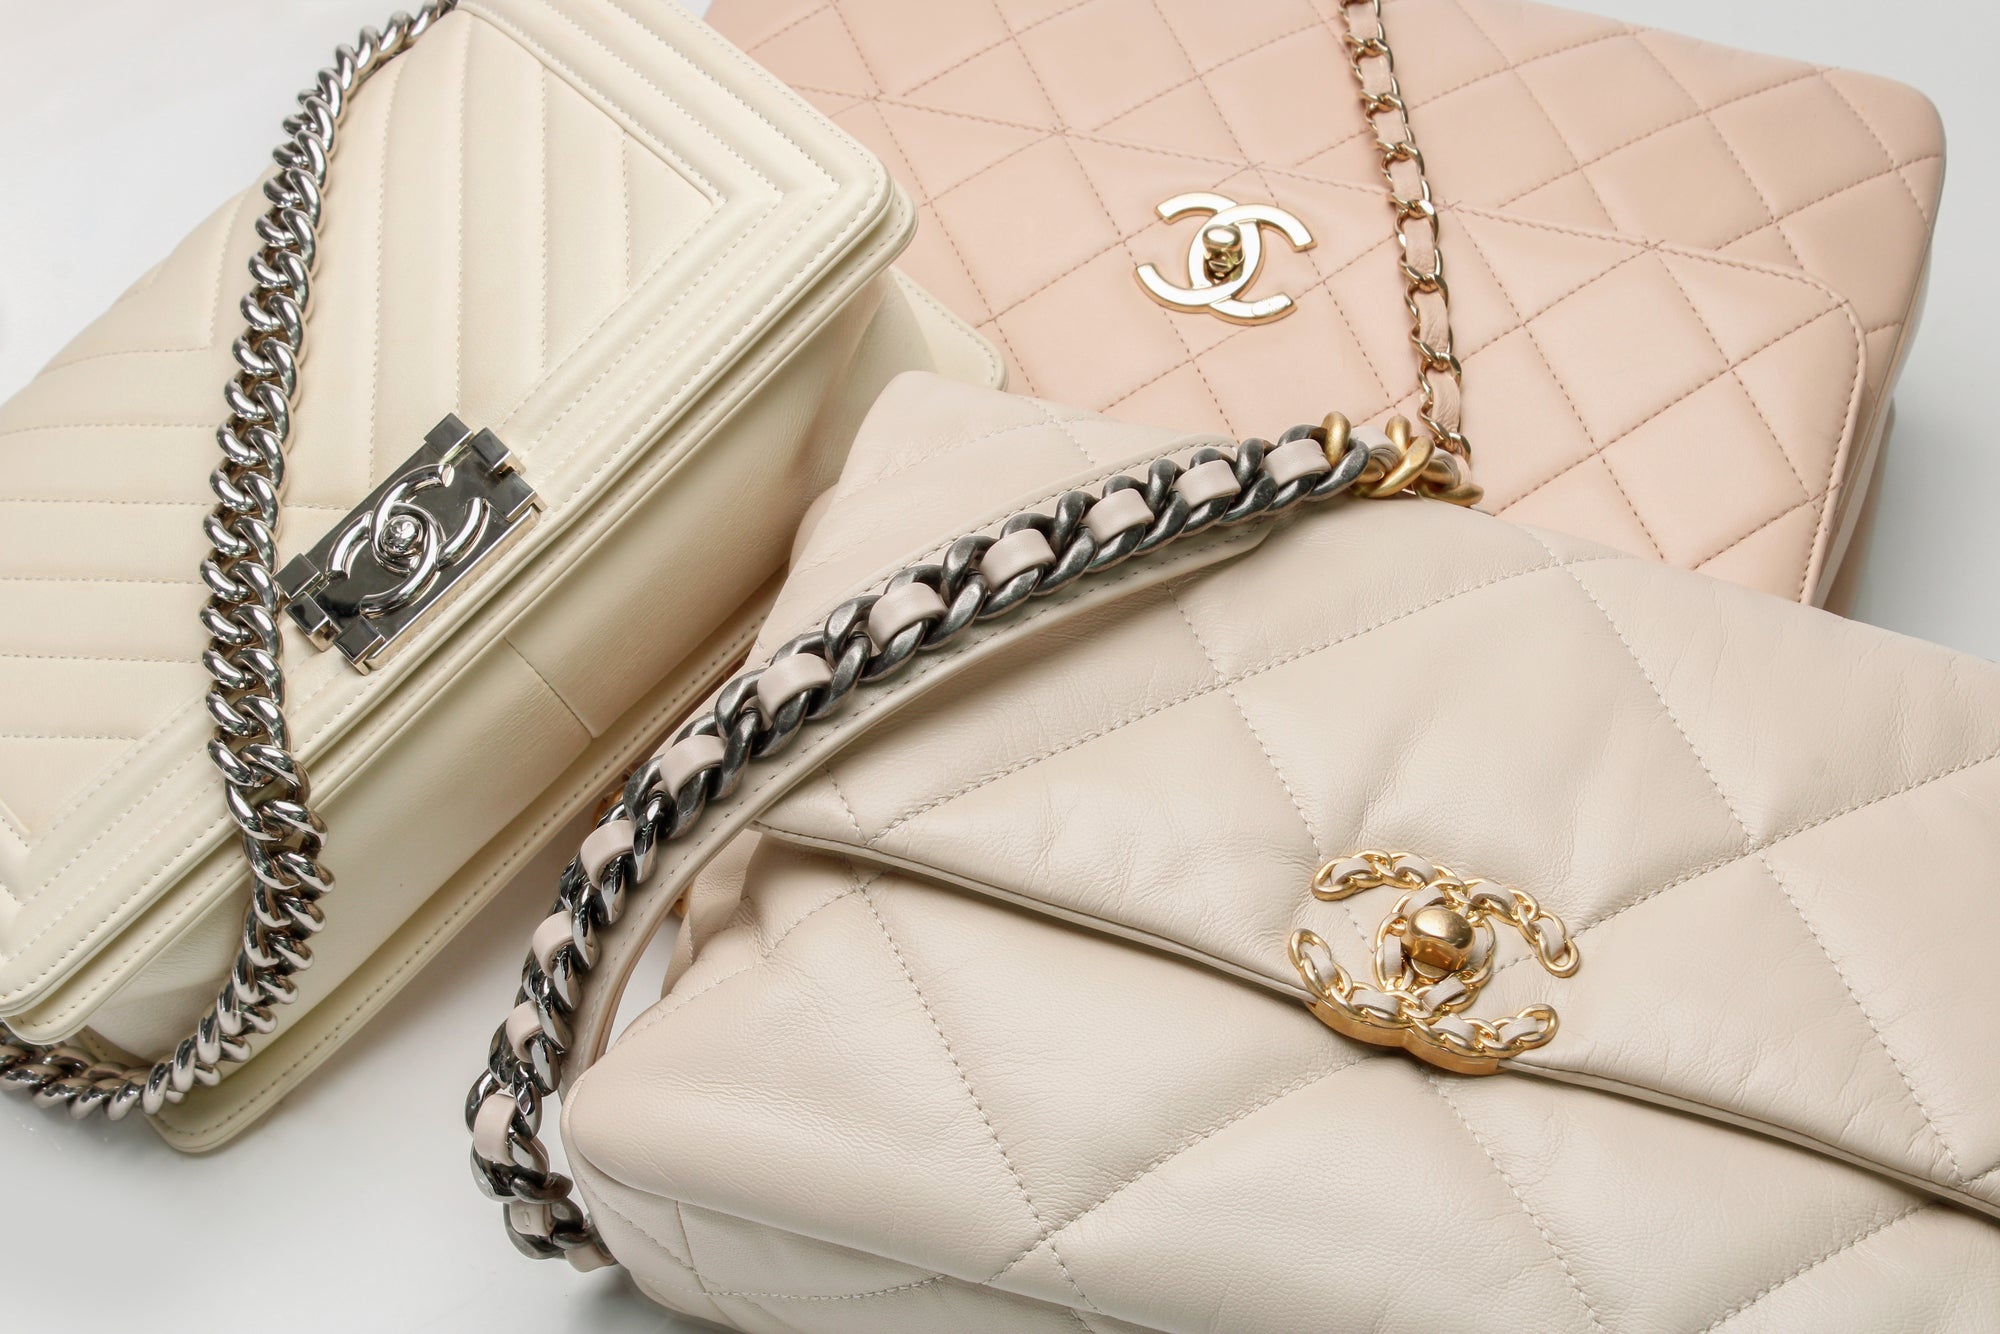 how to tell a real chanel purse